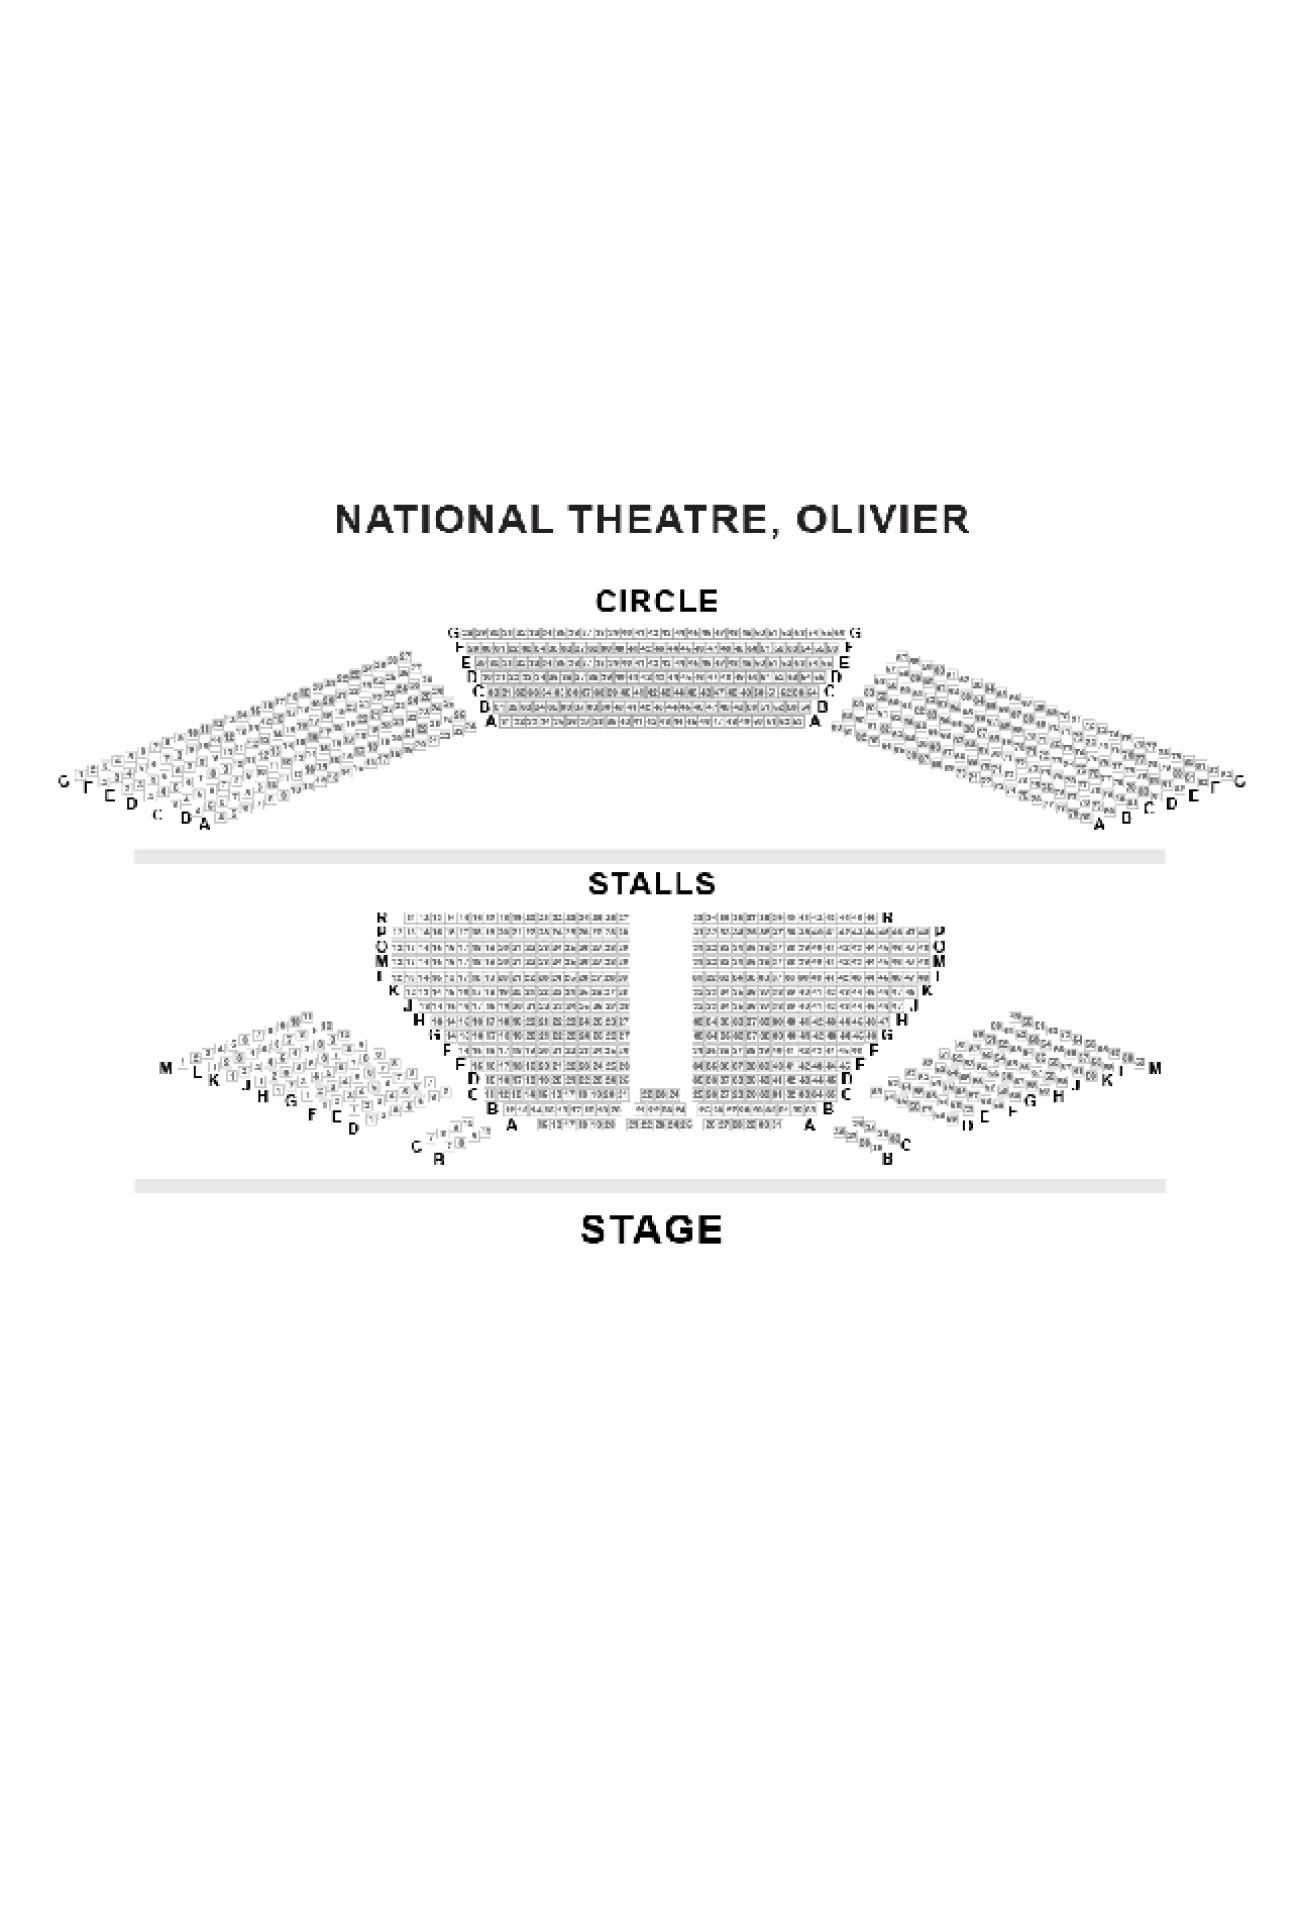 Olivier Theatre (National Theatre) Seating plan